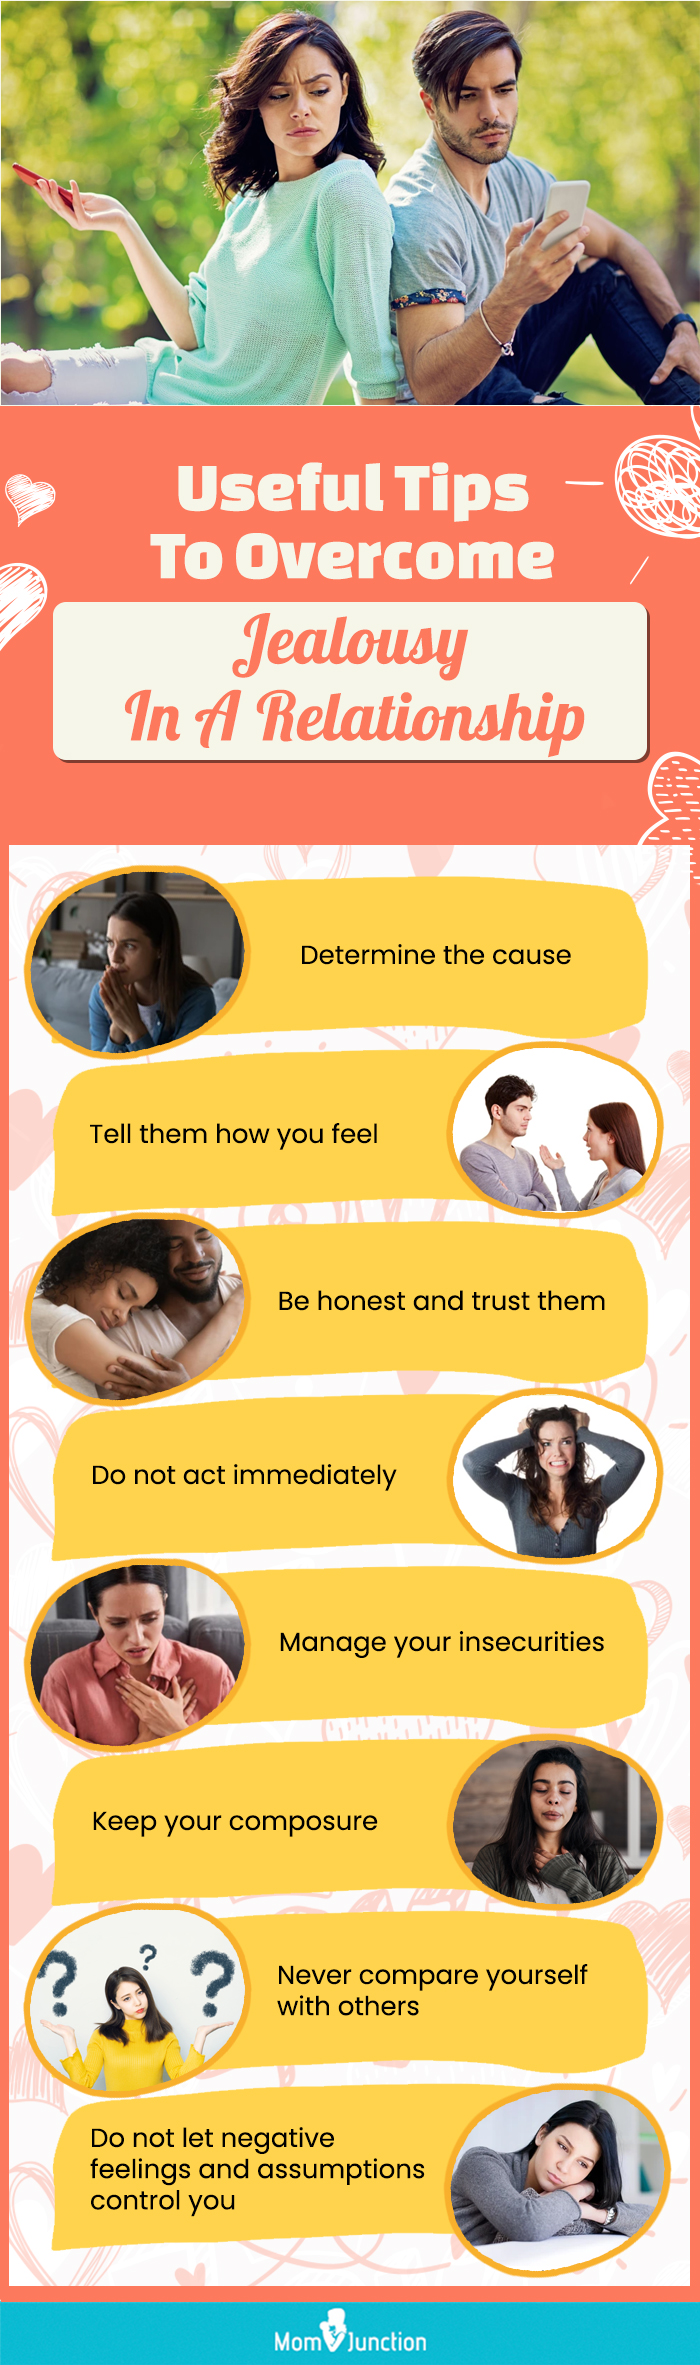 useful tips to overcome jealousy in a relationship (infographic)